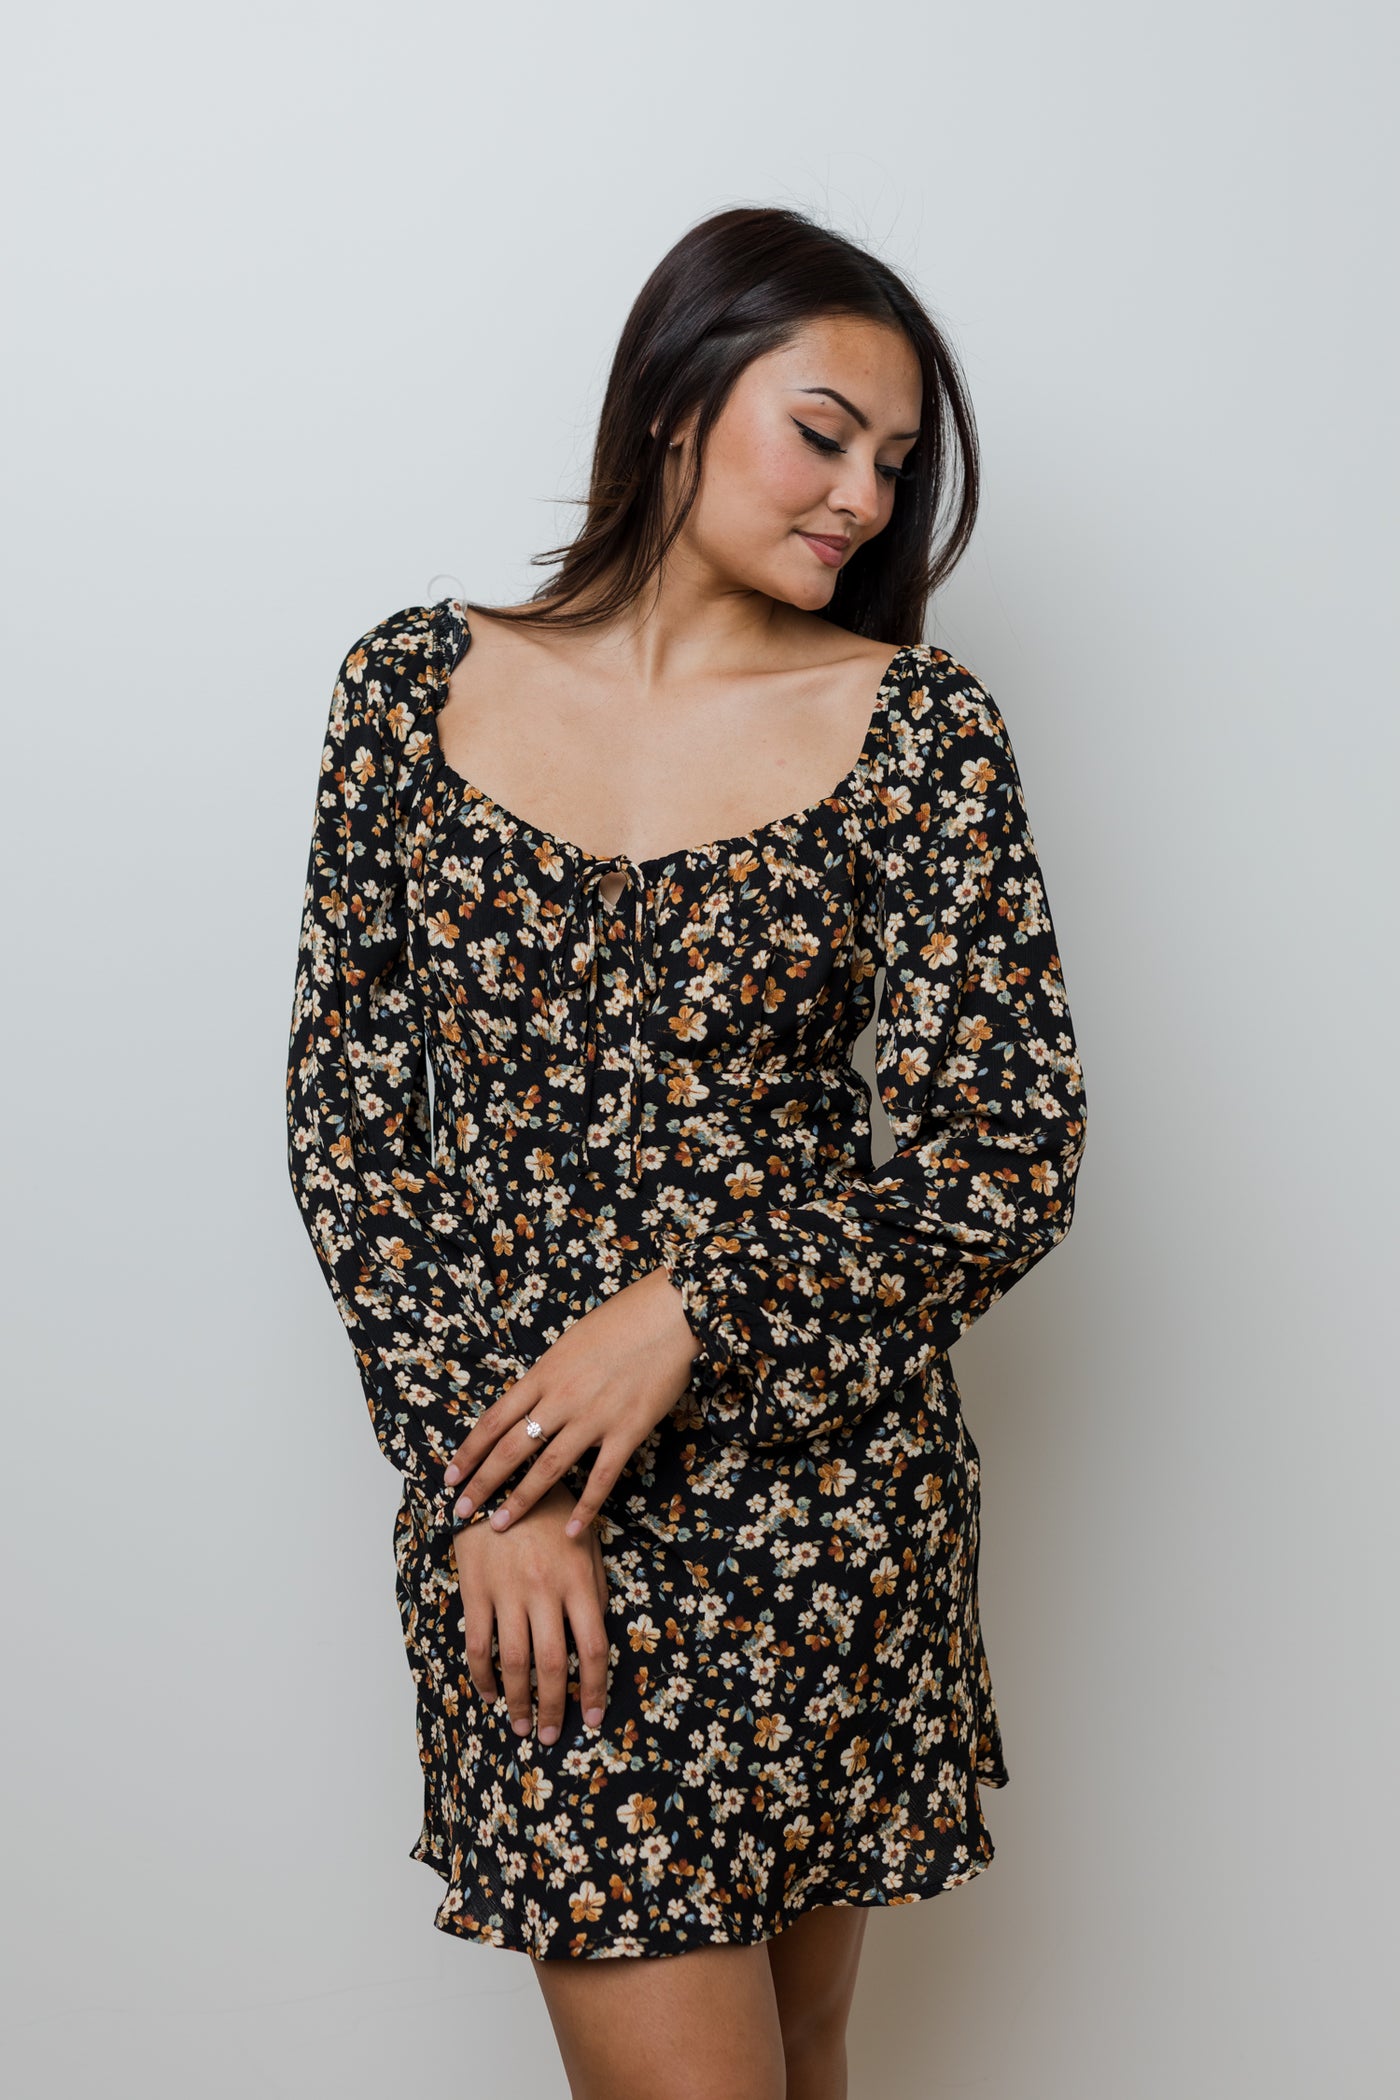 The Back in the Game Black Floral Print Long Sleeve Mini Dress